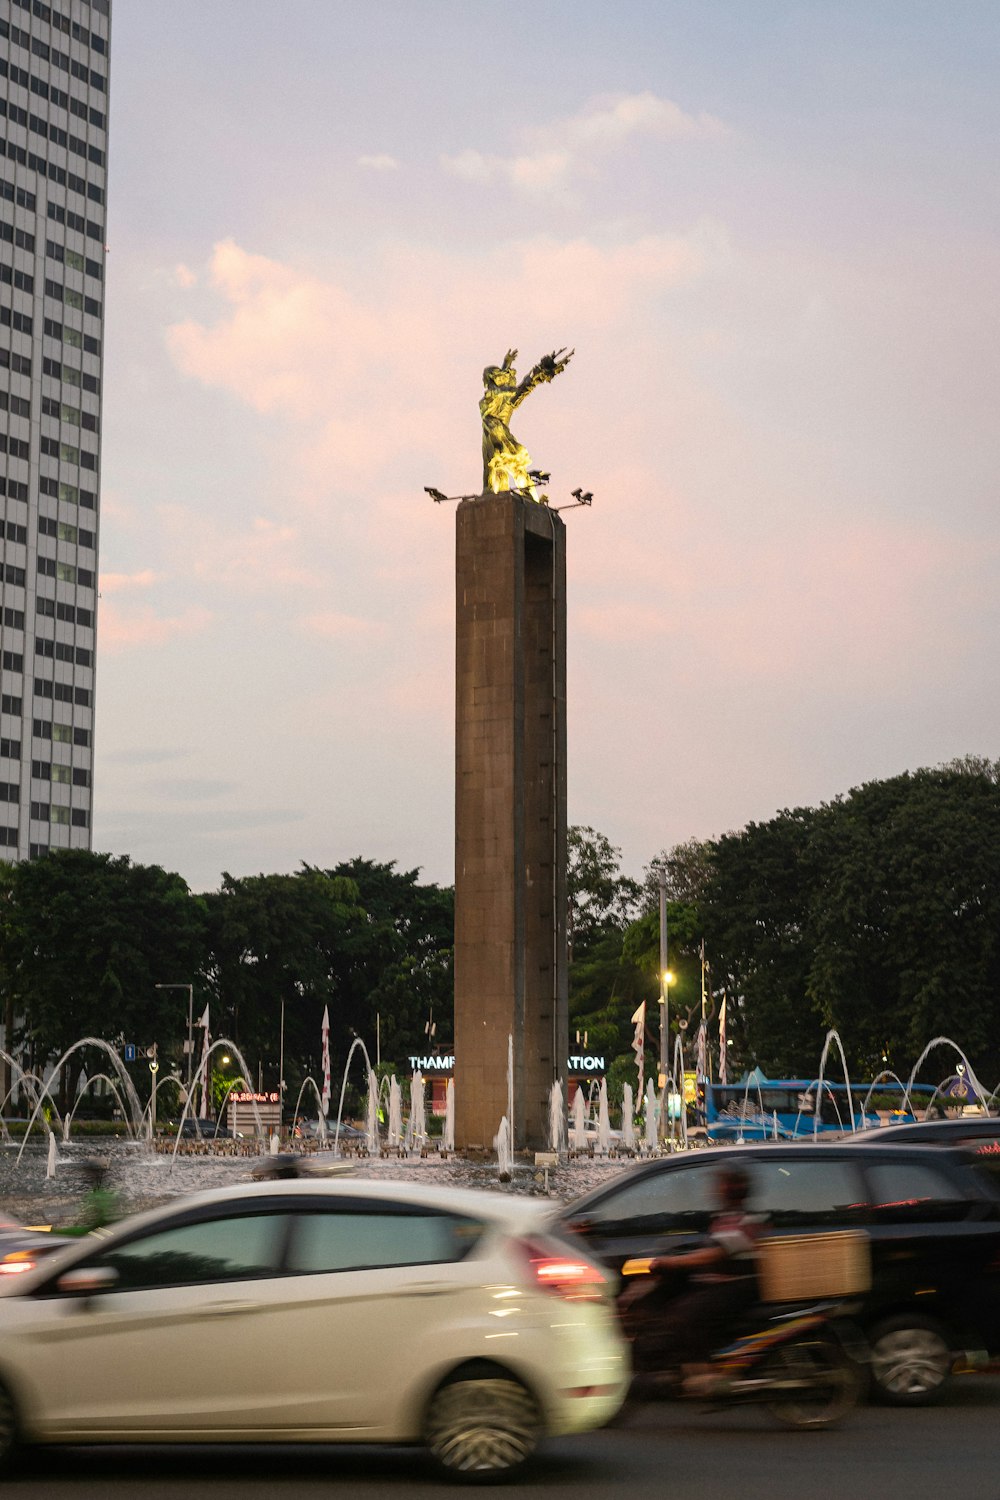 a statue of a person holding a torch in a city